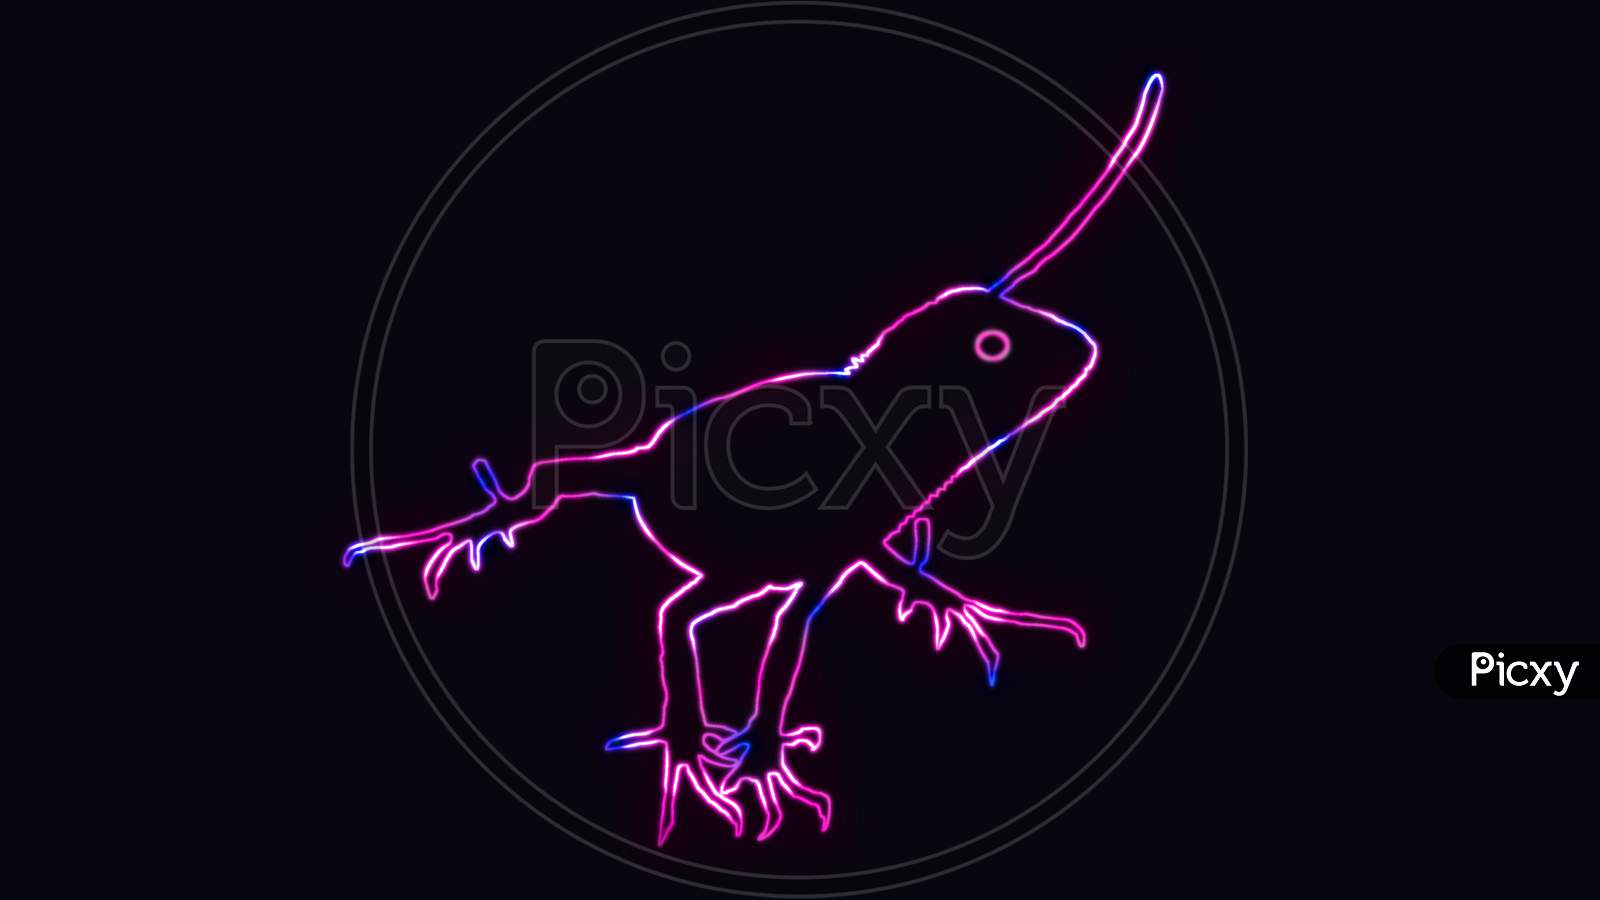 Beautiful Outline Of Chameleon Or Lizard With Neon Lighting. Animal Outline With Neon Light Effect Isolated On Black Background.